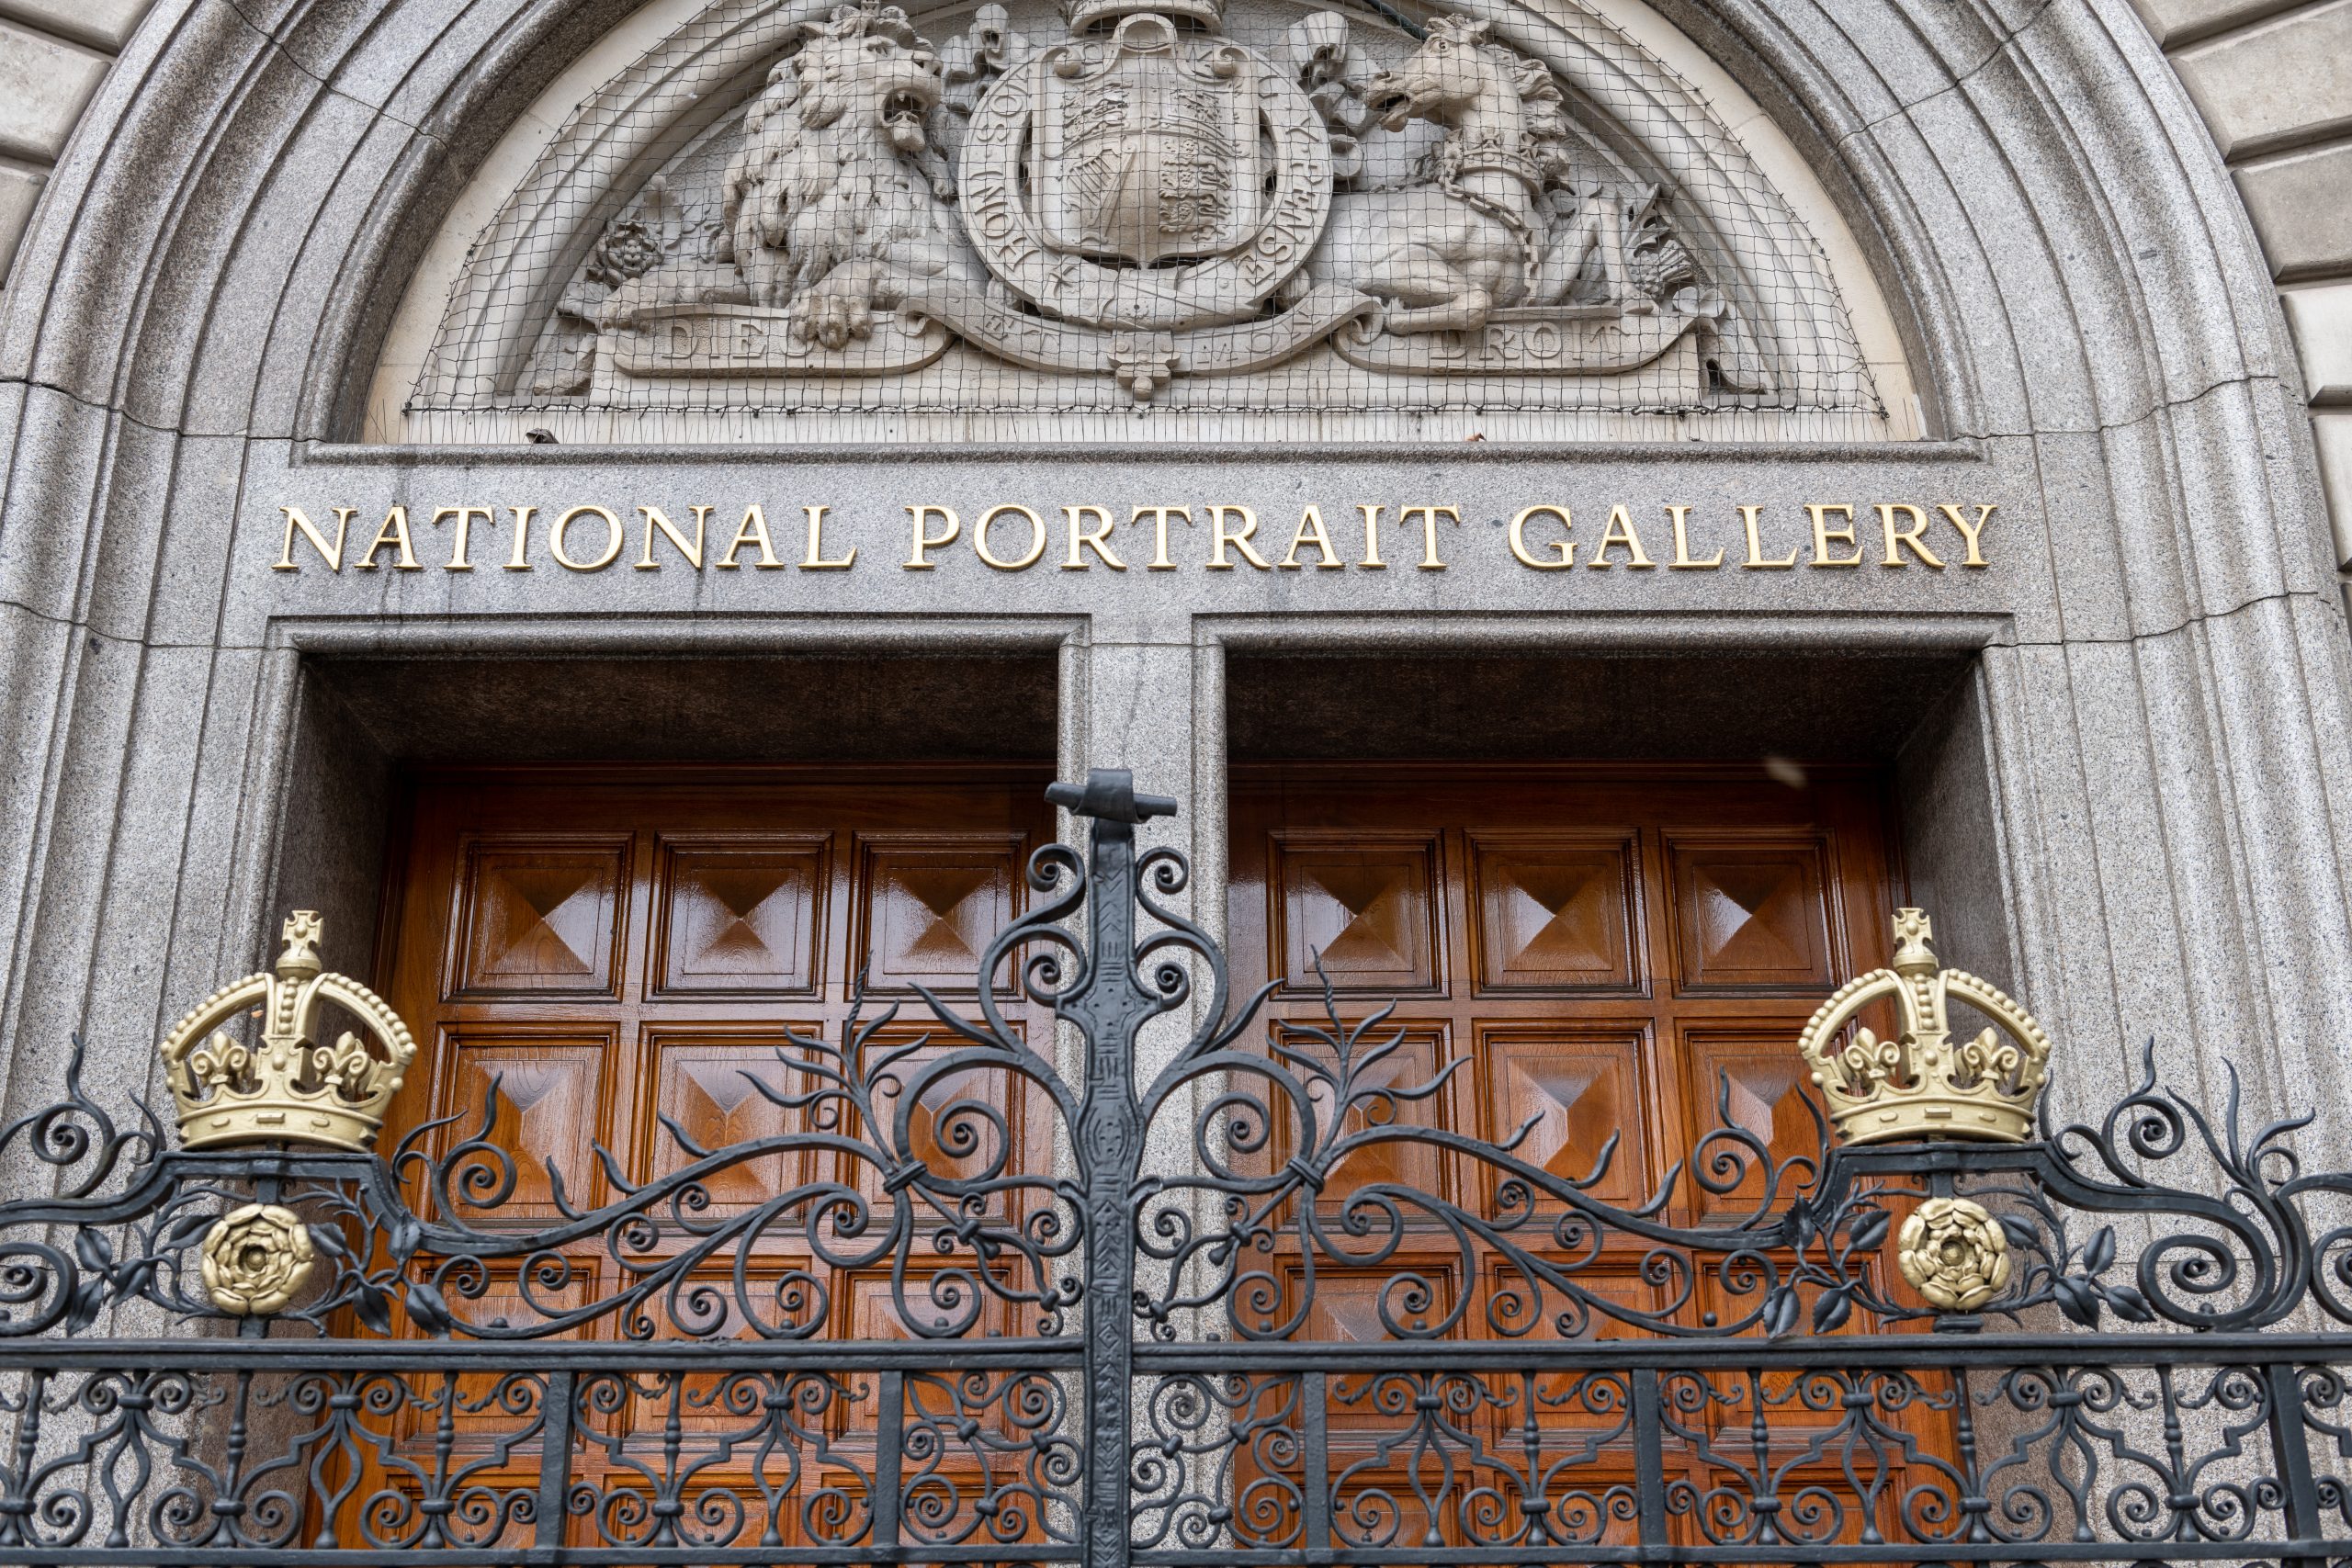 Detail of the entrance and door of the National Portrait Gallery.